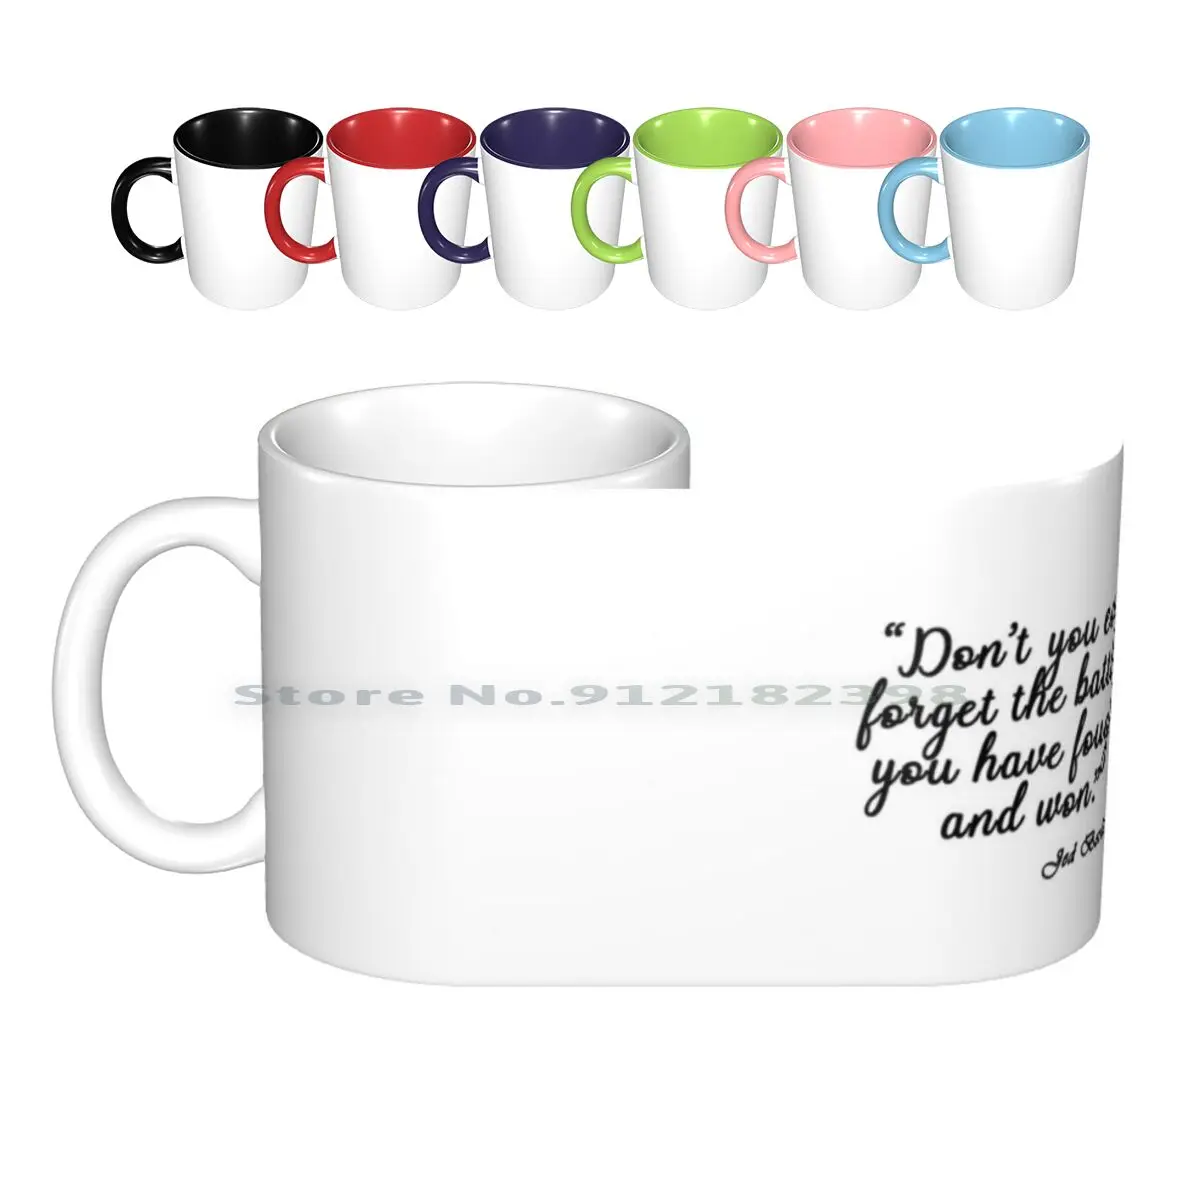 

Do Not You Ever Forget The Battles You Have Fought And Won. Ceramic Mugs Coffee Cups Milk Tea Mug The West Wing West Wing Donna